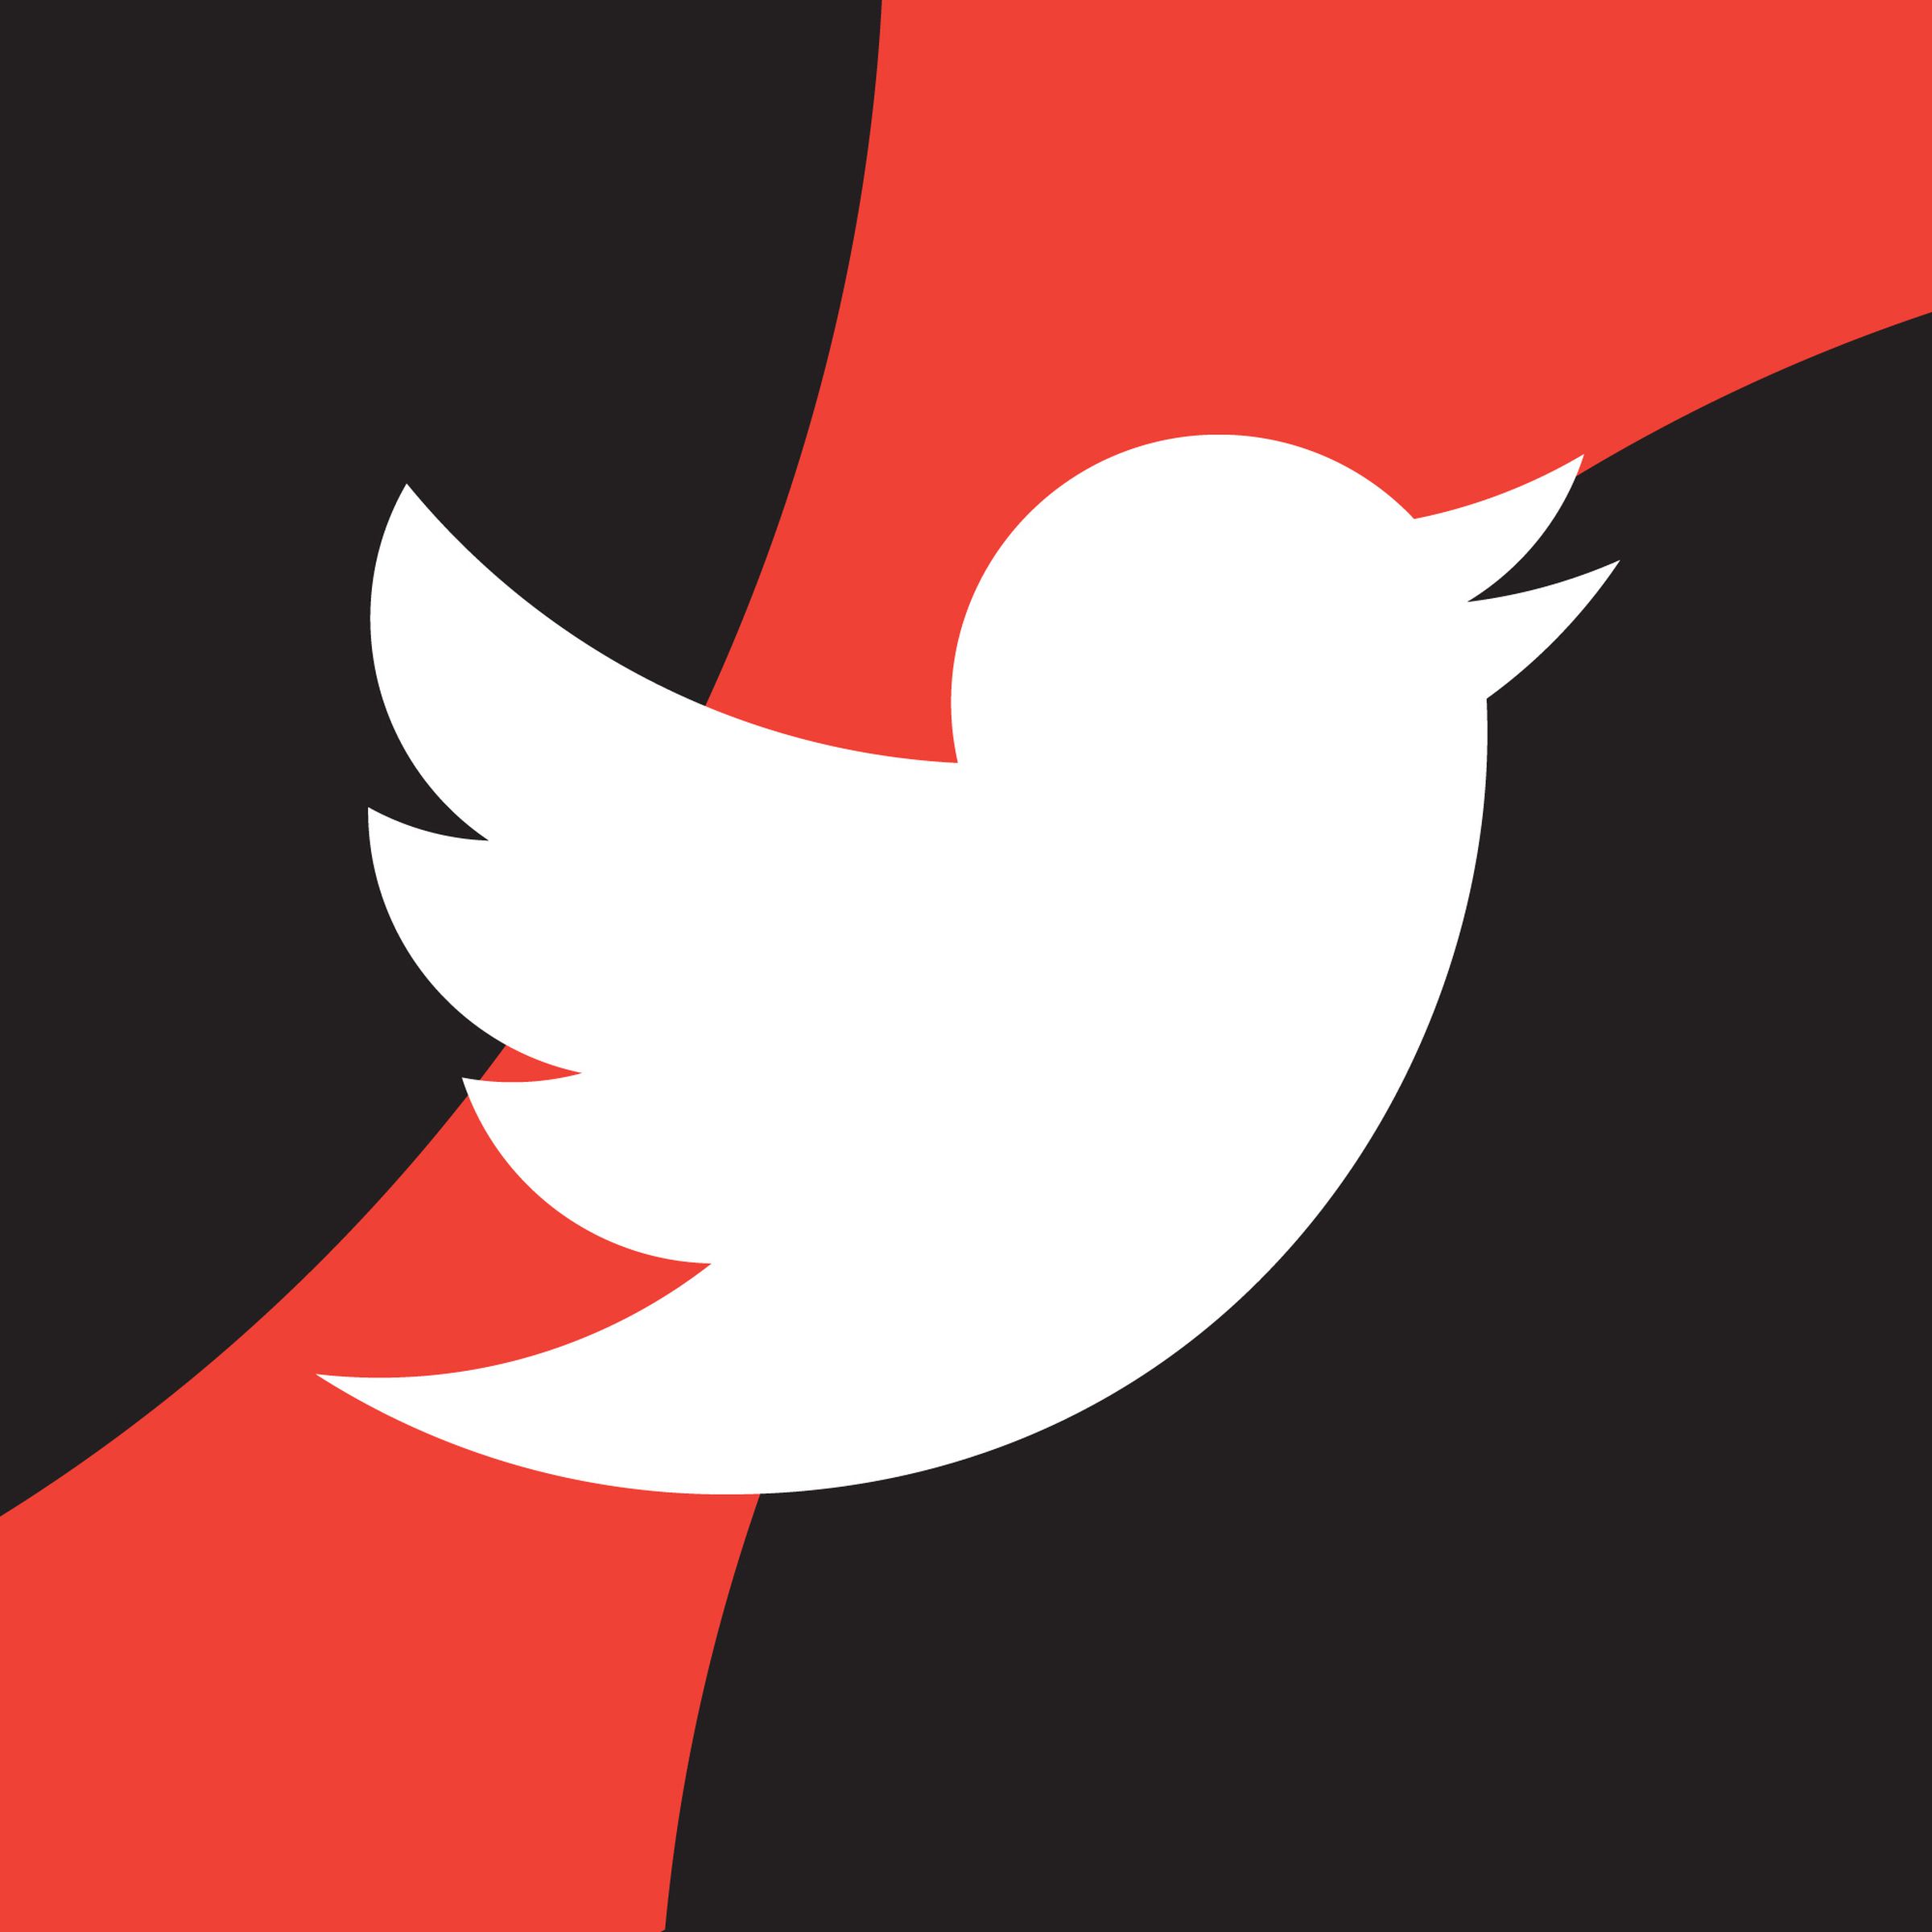 Twitter bird logo in white, over a red and black background.